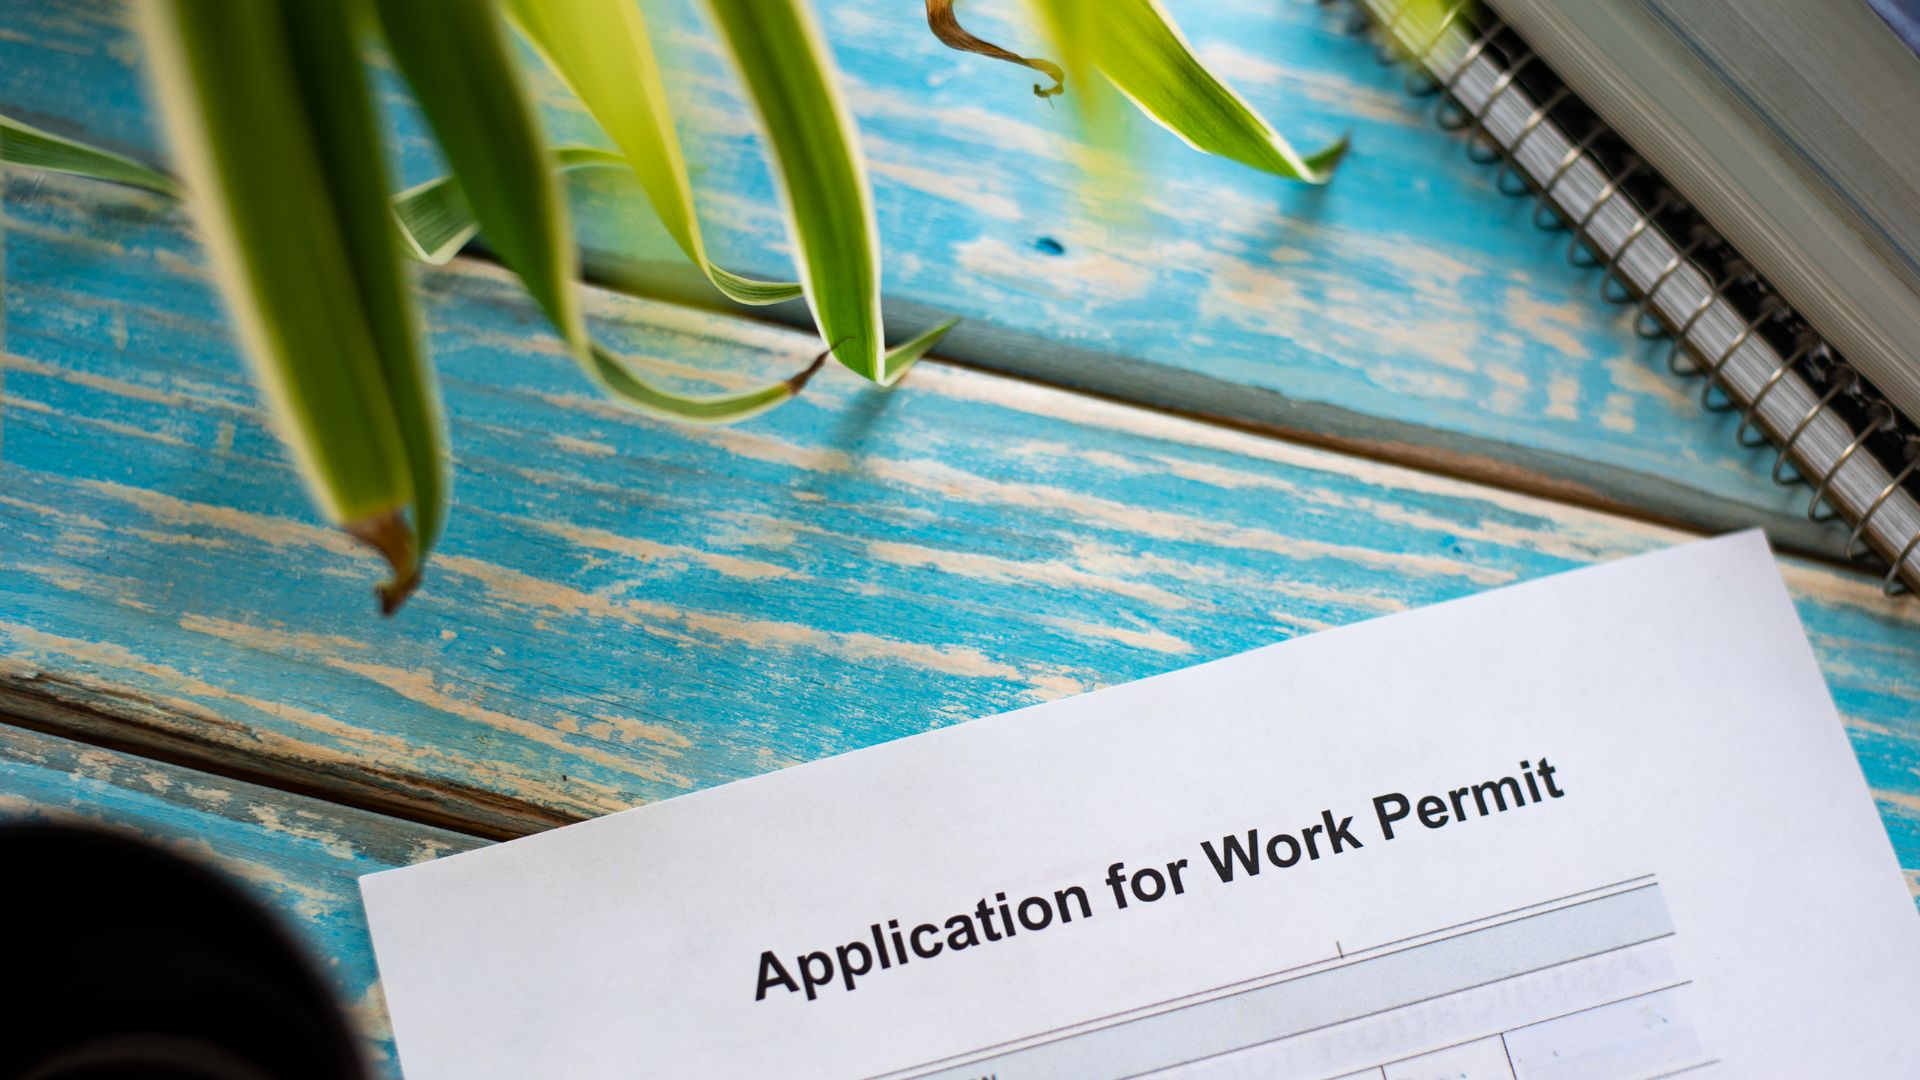 Business Immigration - Application for Work Permit in Canada